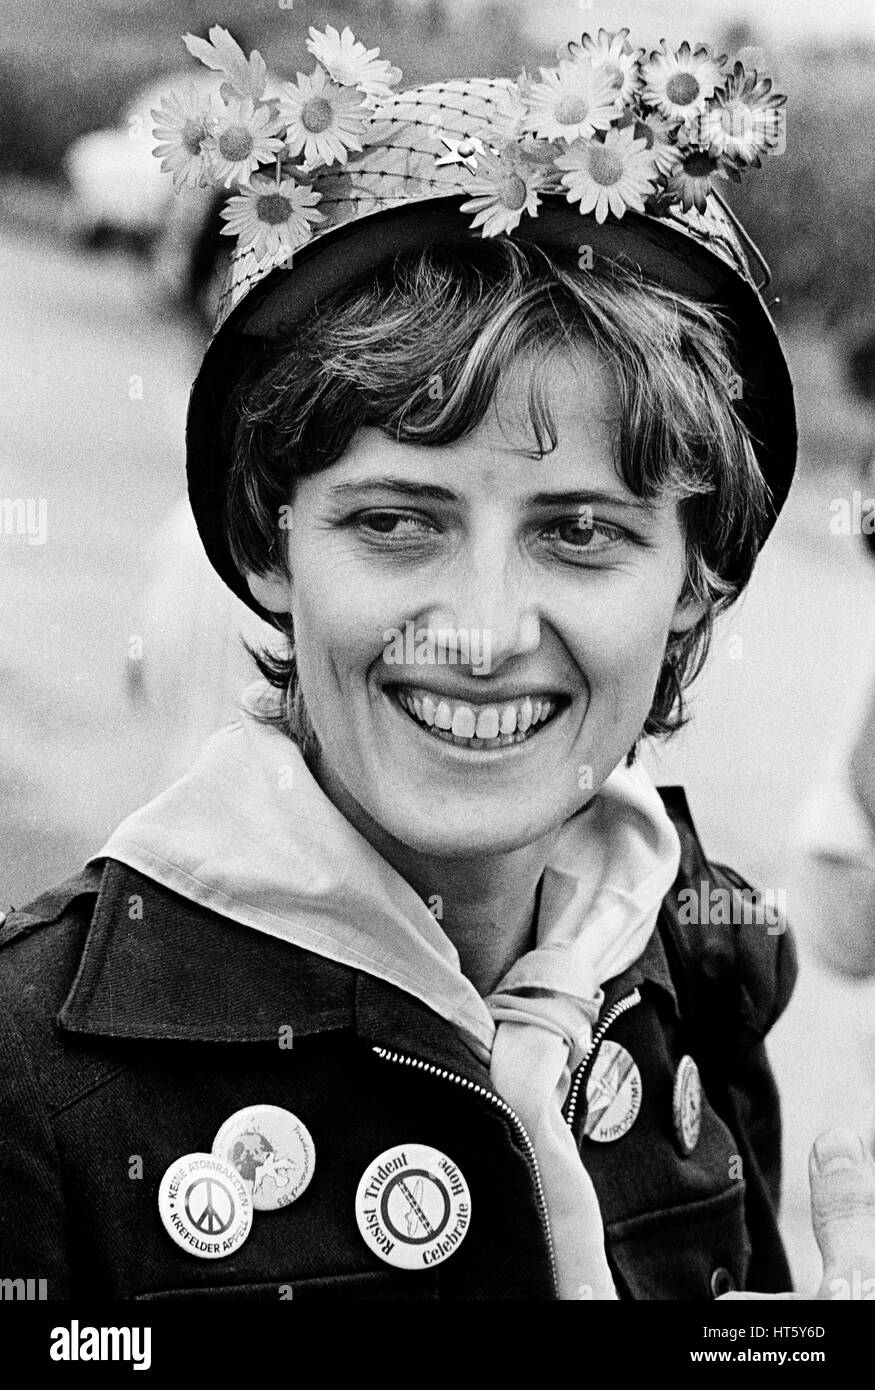 Mutlangen, Germany, 01.Sept.1983: PETRA KELLY (* 29 November 1947, † probably 1 October 1992), co-founder of the german Green Party "Die Gruenen" with a decorated steel helmet on a peace demonstration in Mutlangen, Germany Stock Photo